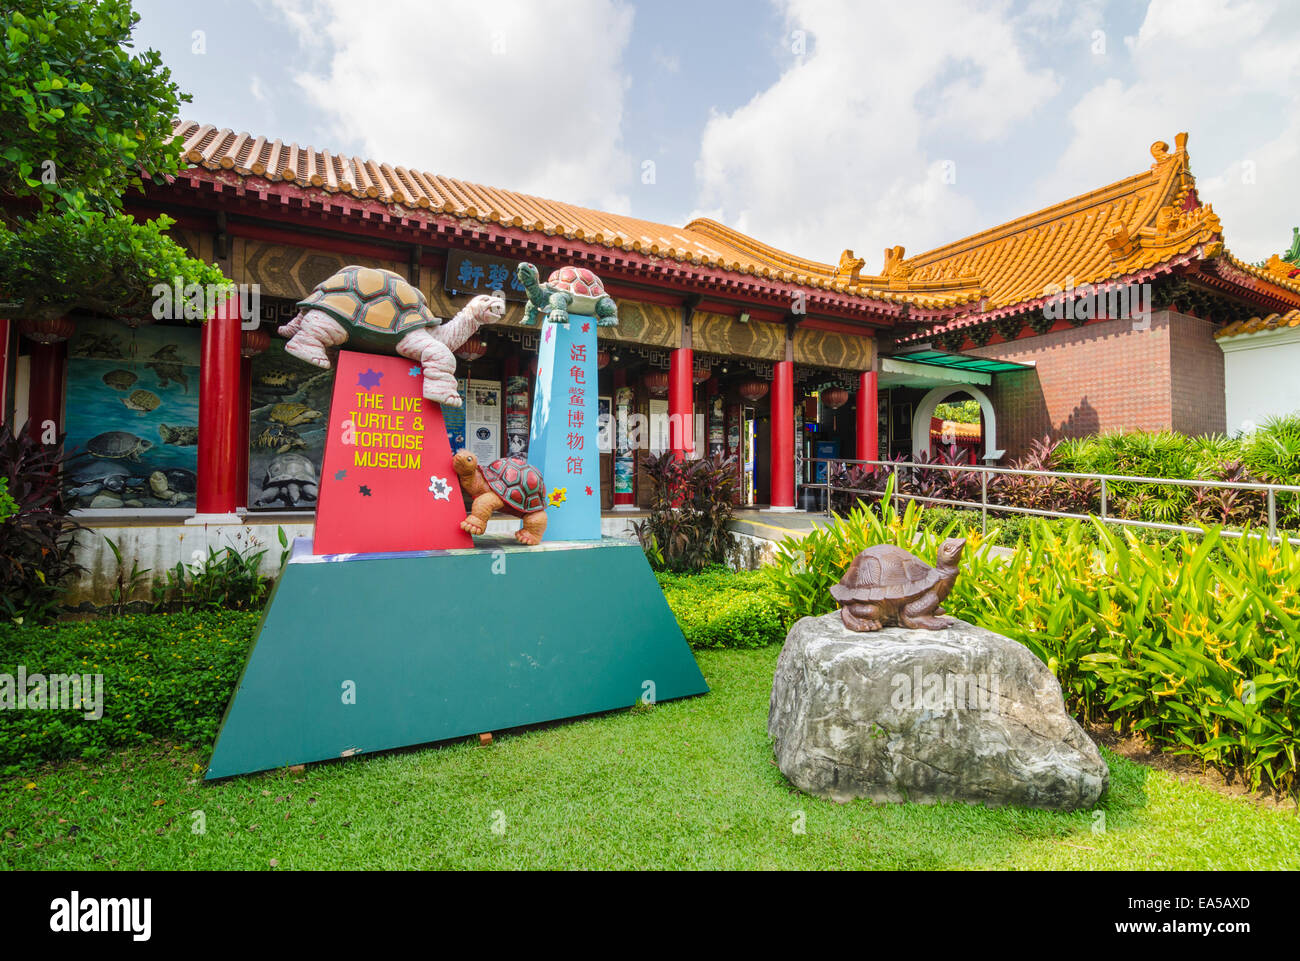 The Live Turtle and Tortoise Museum in the Chinese Gardens, Singapore Stock Photo